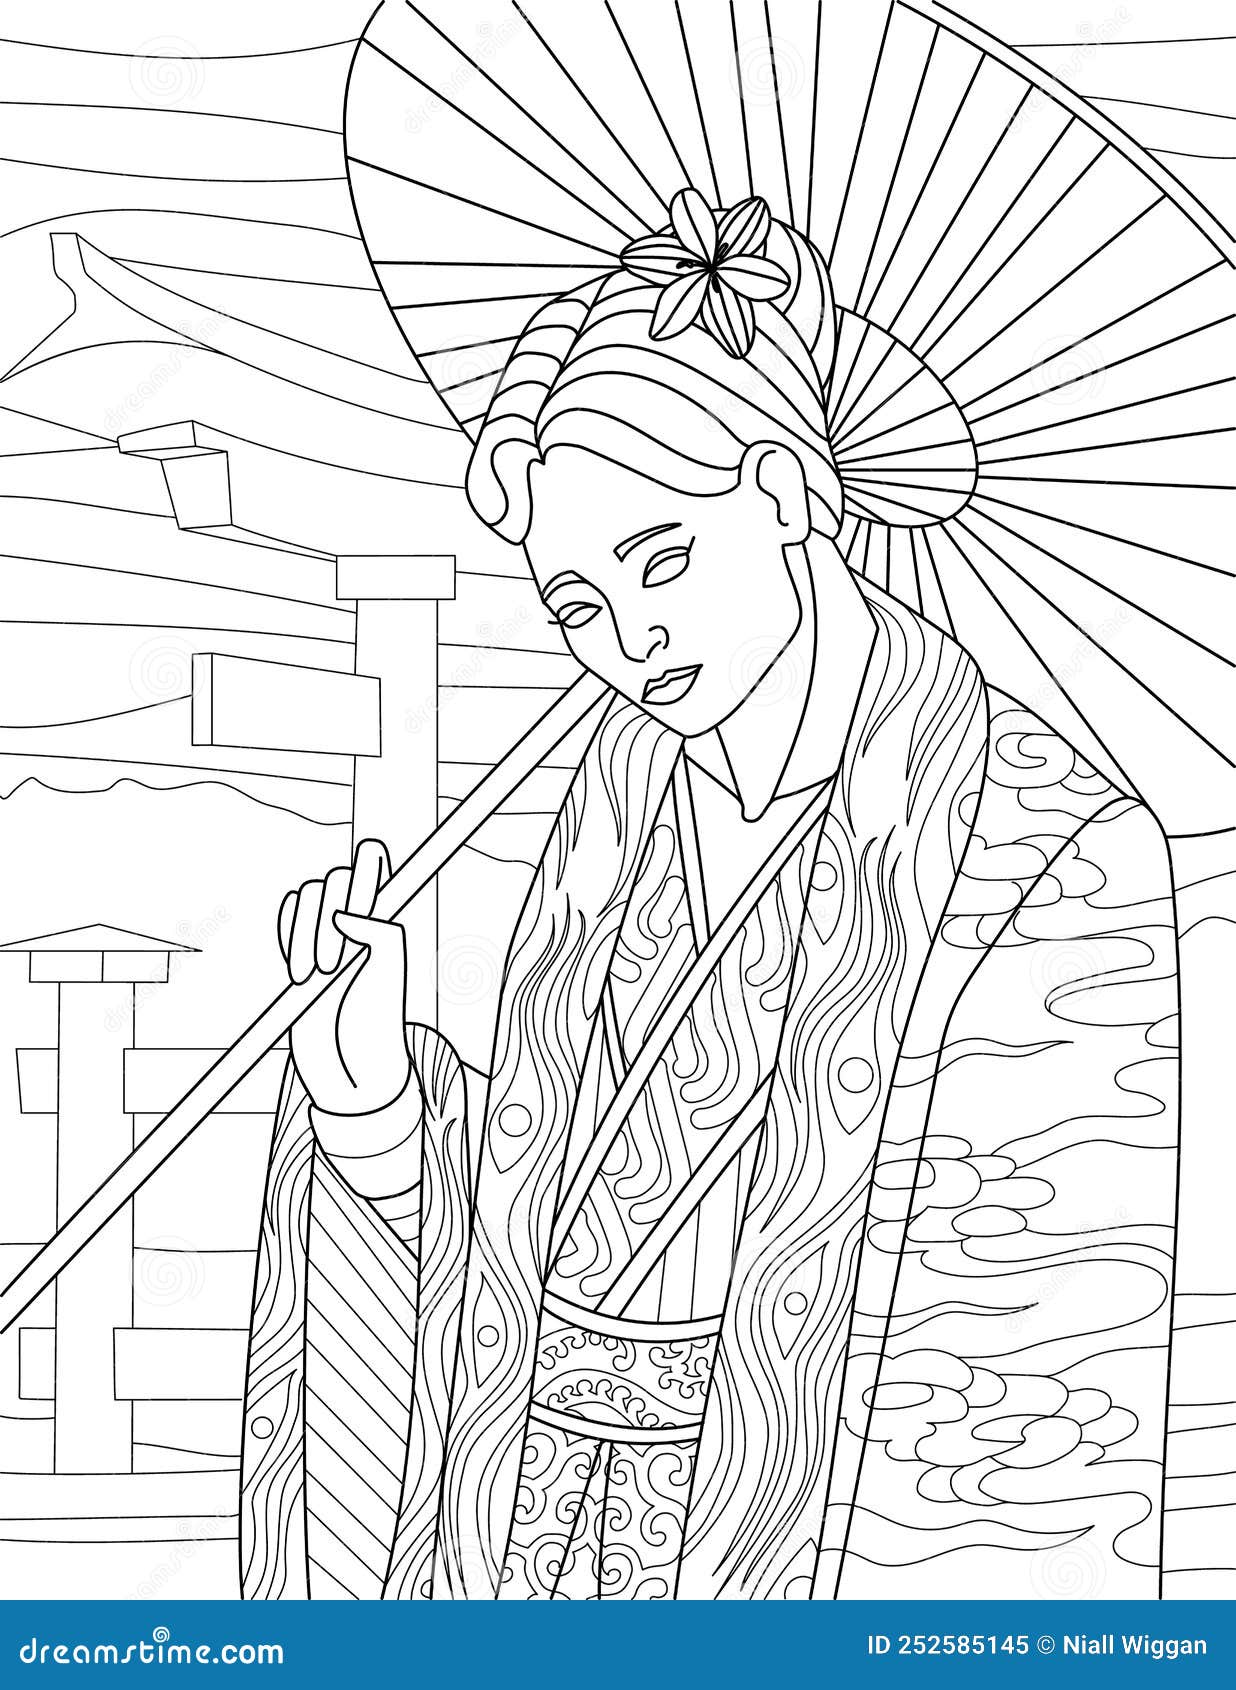 Coloring Page with Japanese Woman Dressed in Traditional Clothes ...